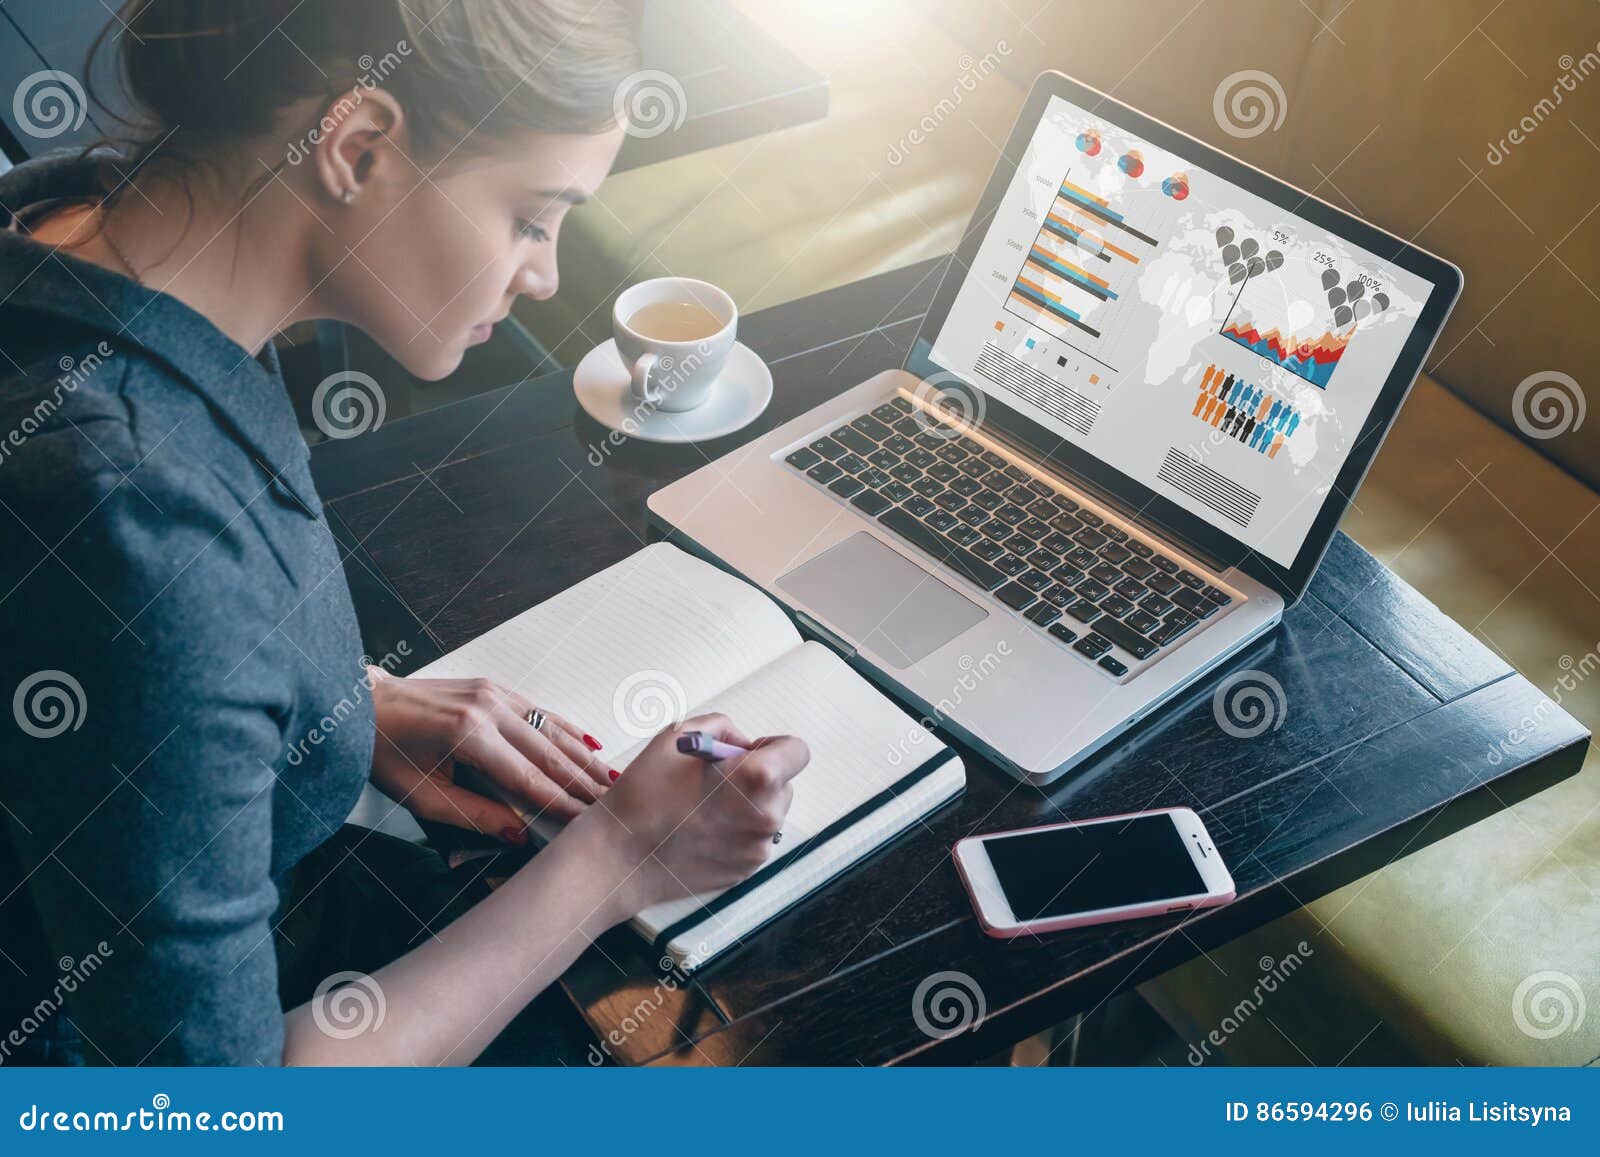 young business woman sitting at table and taking notes in notebook.on computer screen graphics and charts.